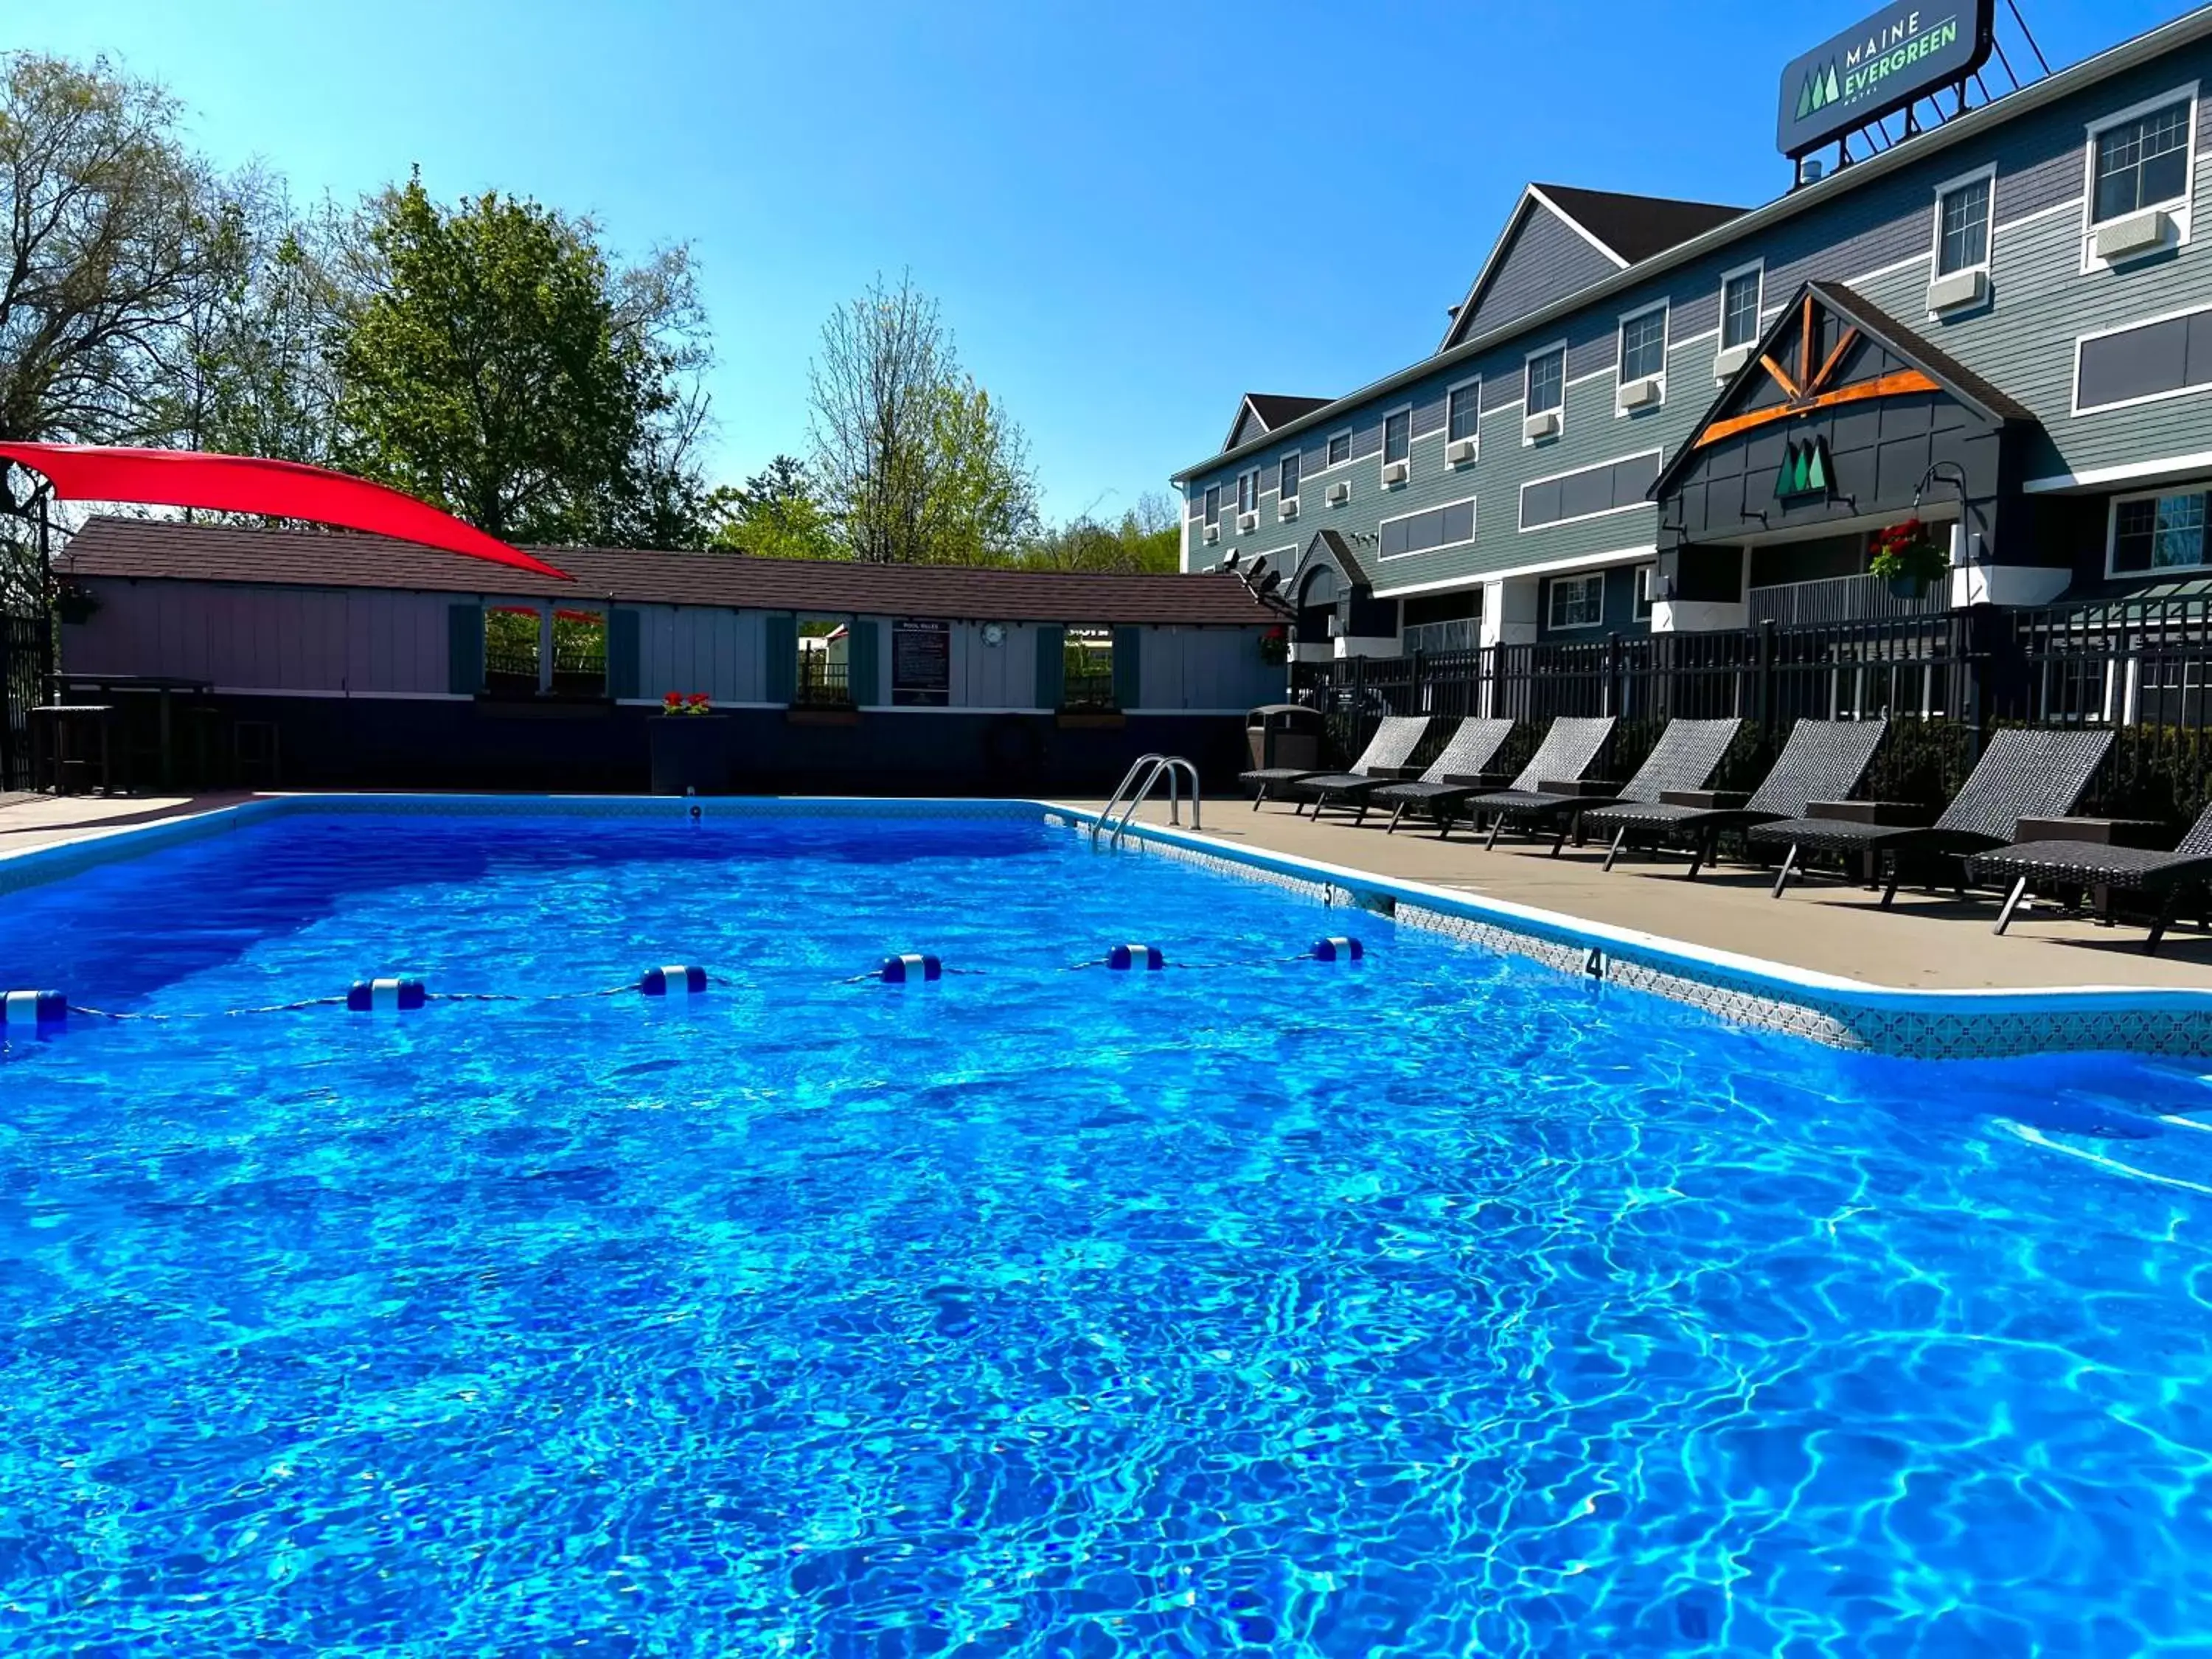 Swimming Pool in Maine Evergreen Hotel, Ascend Hotel Collection